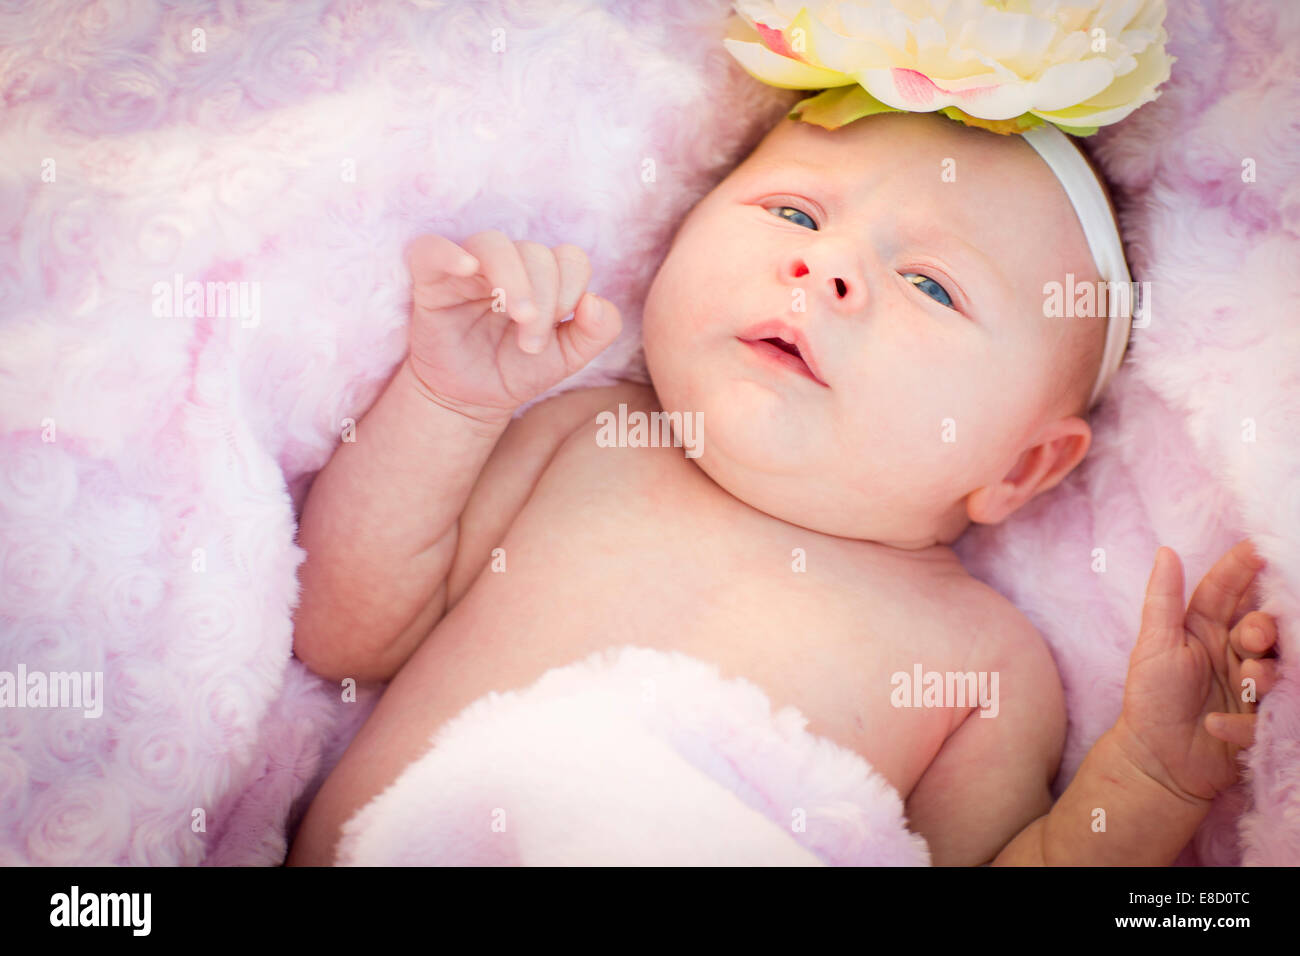 Beautiful Newborn Baby Girl Laying Peacefully in Soft Pink Blanket. Stock Photo